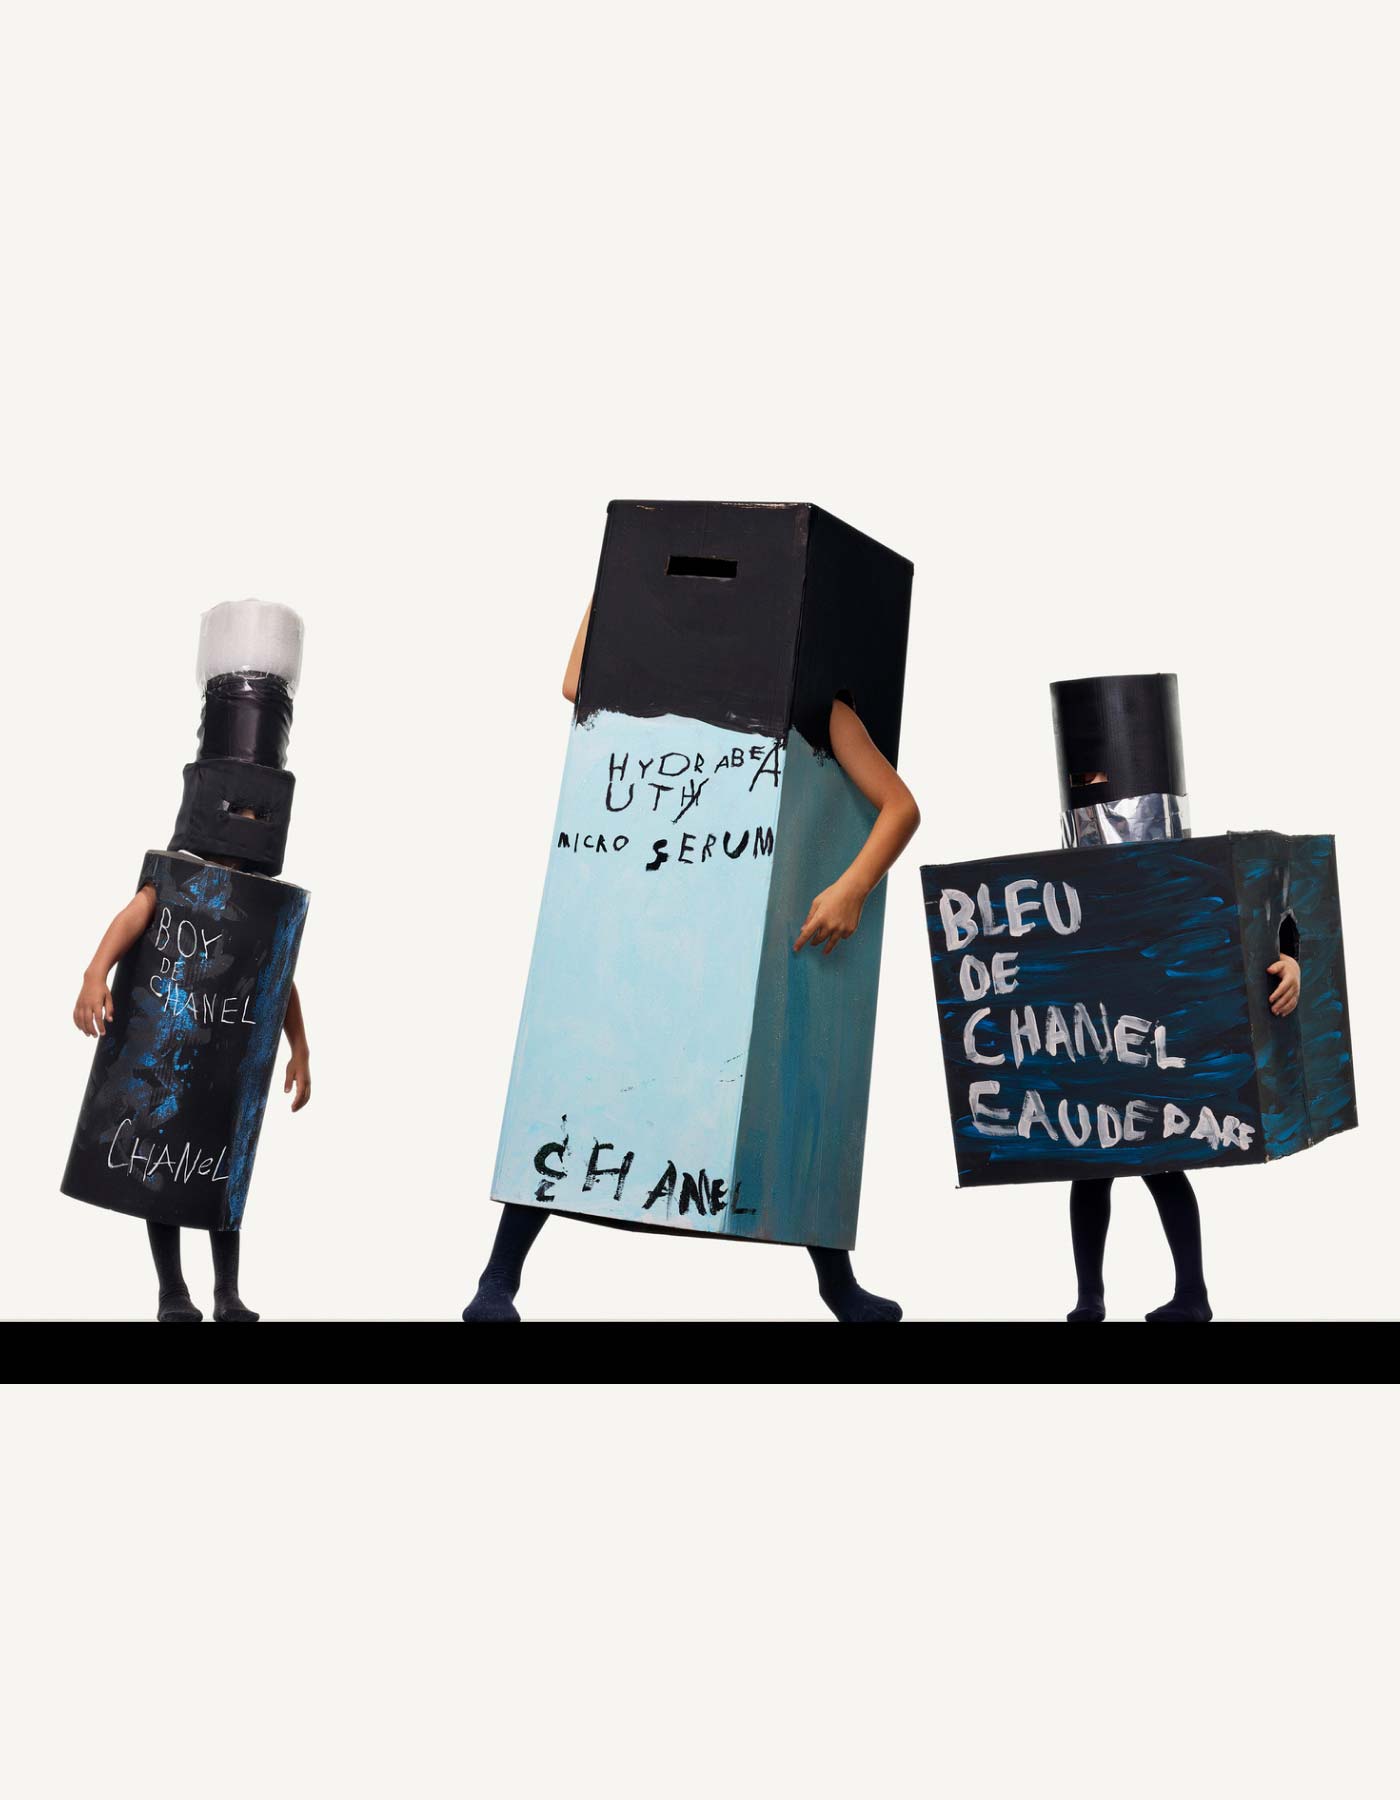 An assortment of Fragrance and Beauty products from the CHANEL Father's Day campaign